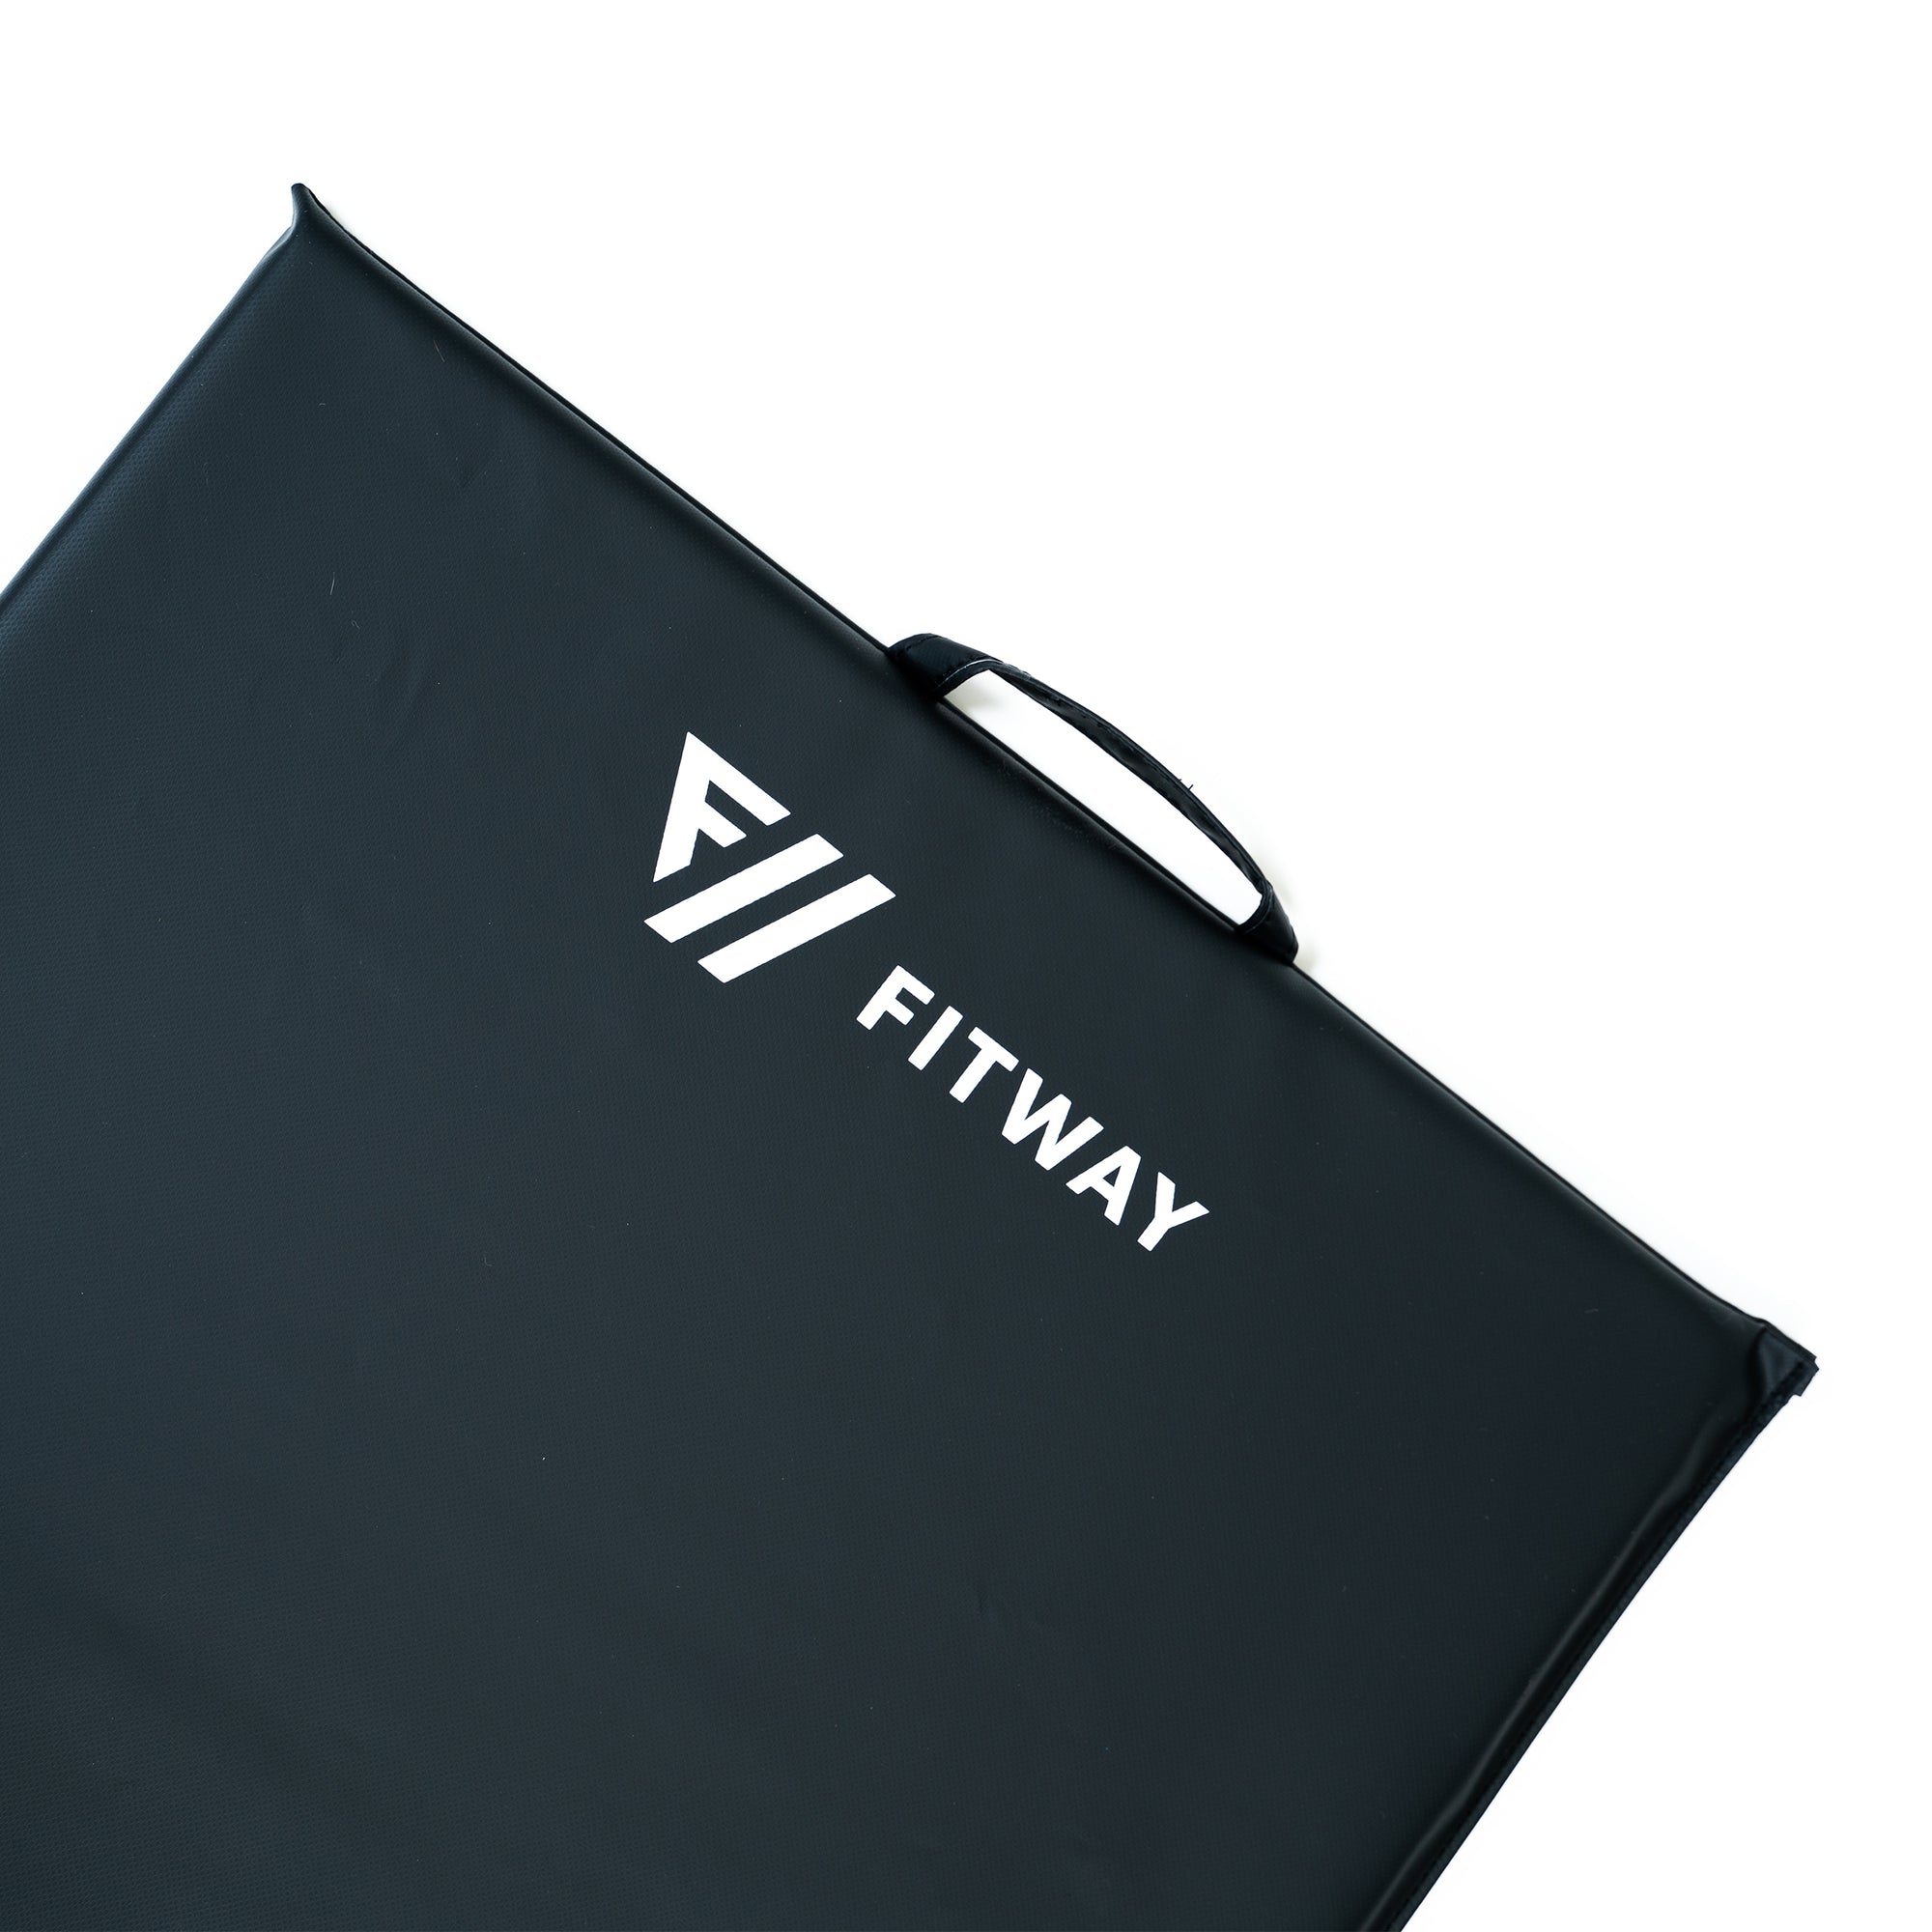 FitWay Equip. 5’ Fitness Mat